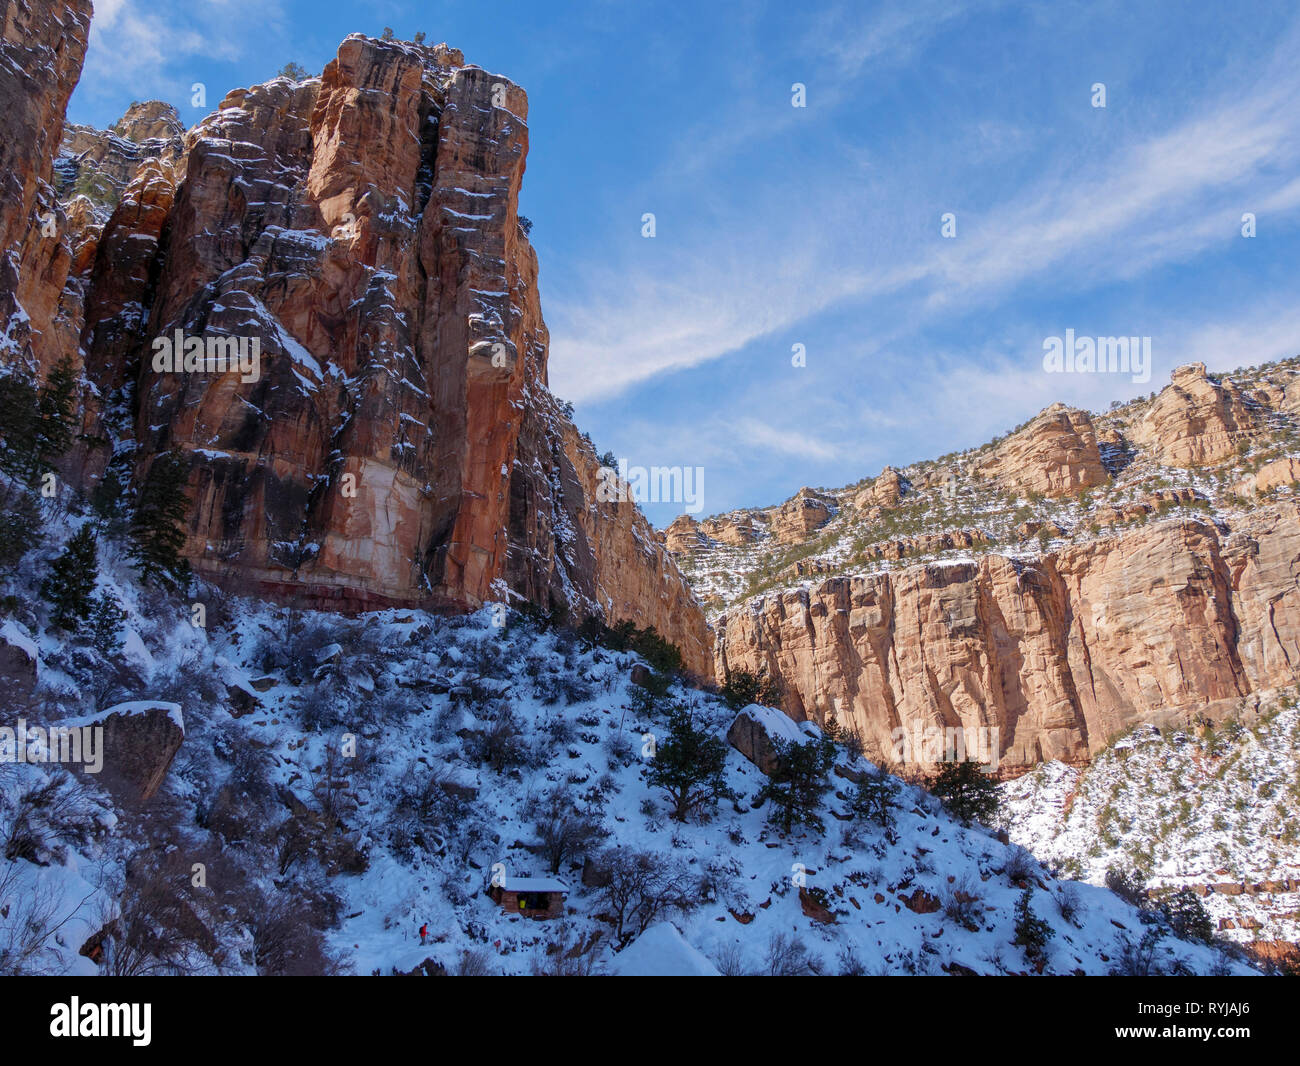 The towering canyon walls on the Bright Angel Trail. When the sun hit one wall, the heat melted ice and chunks of ice and rock came down with an amazi Stock Photo